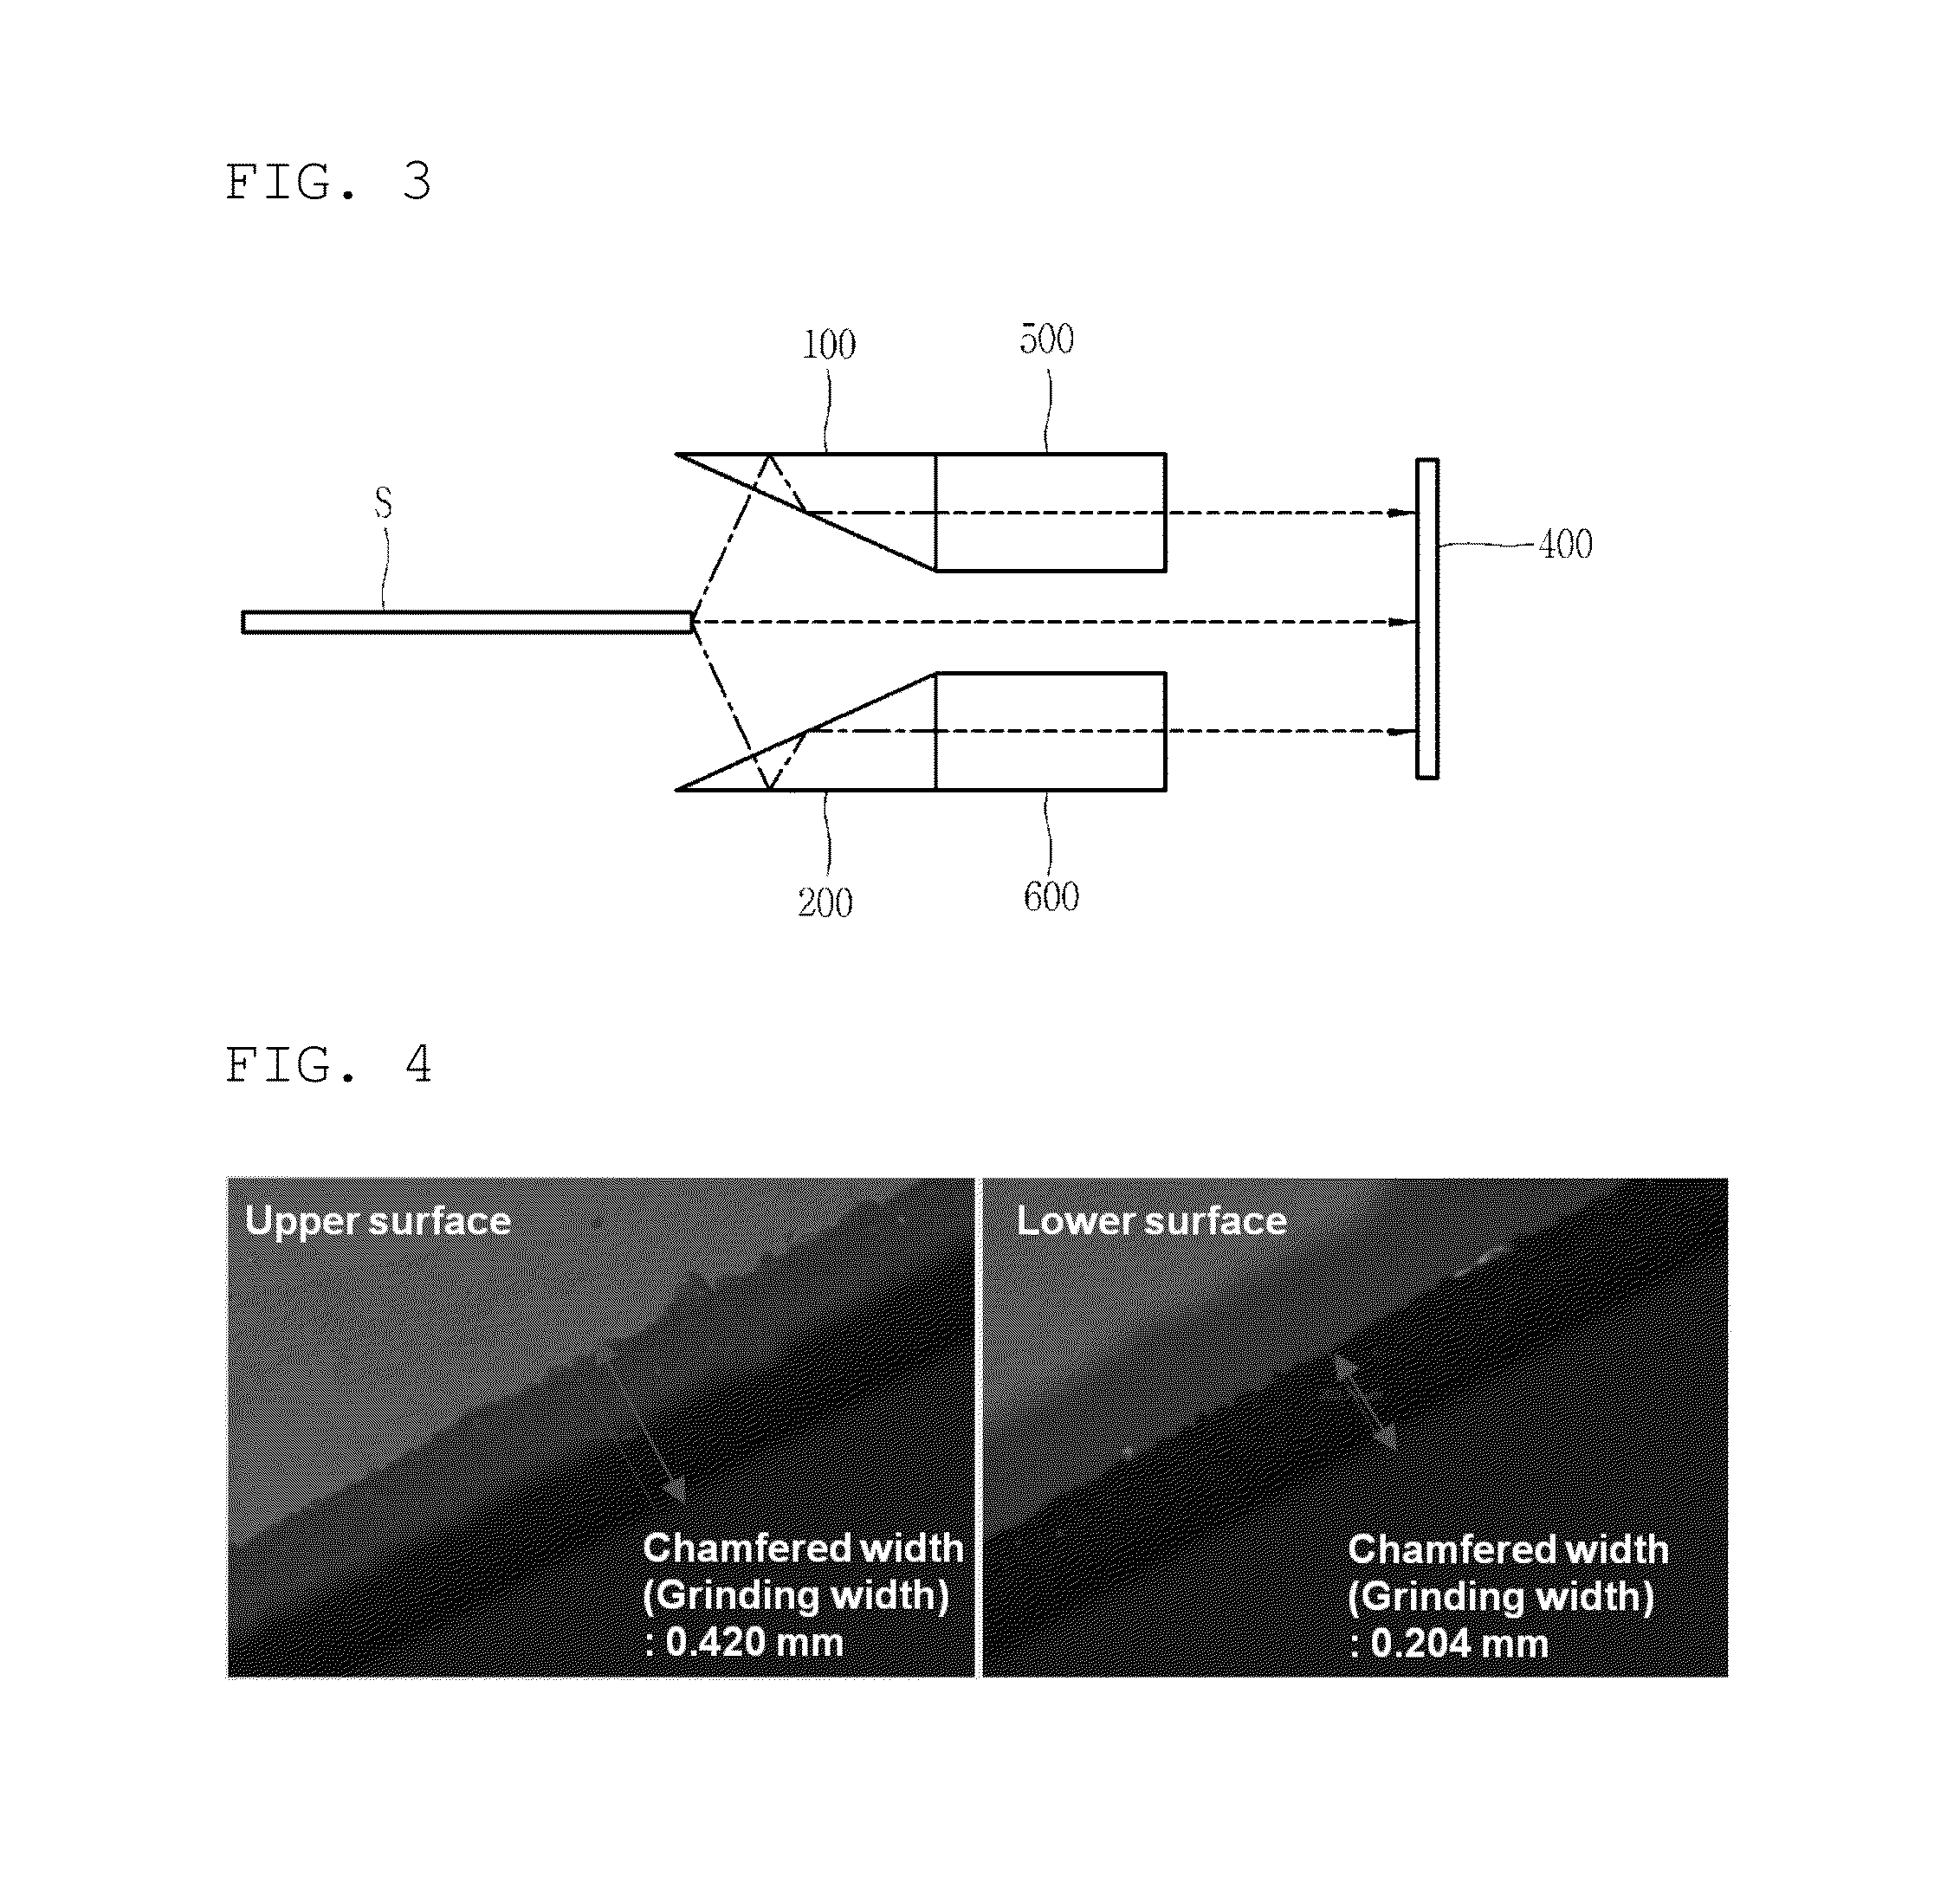 Apparatus for inspecting edge of substrate